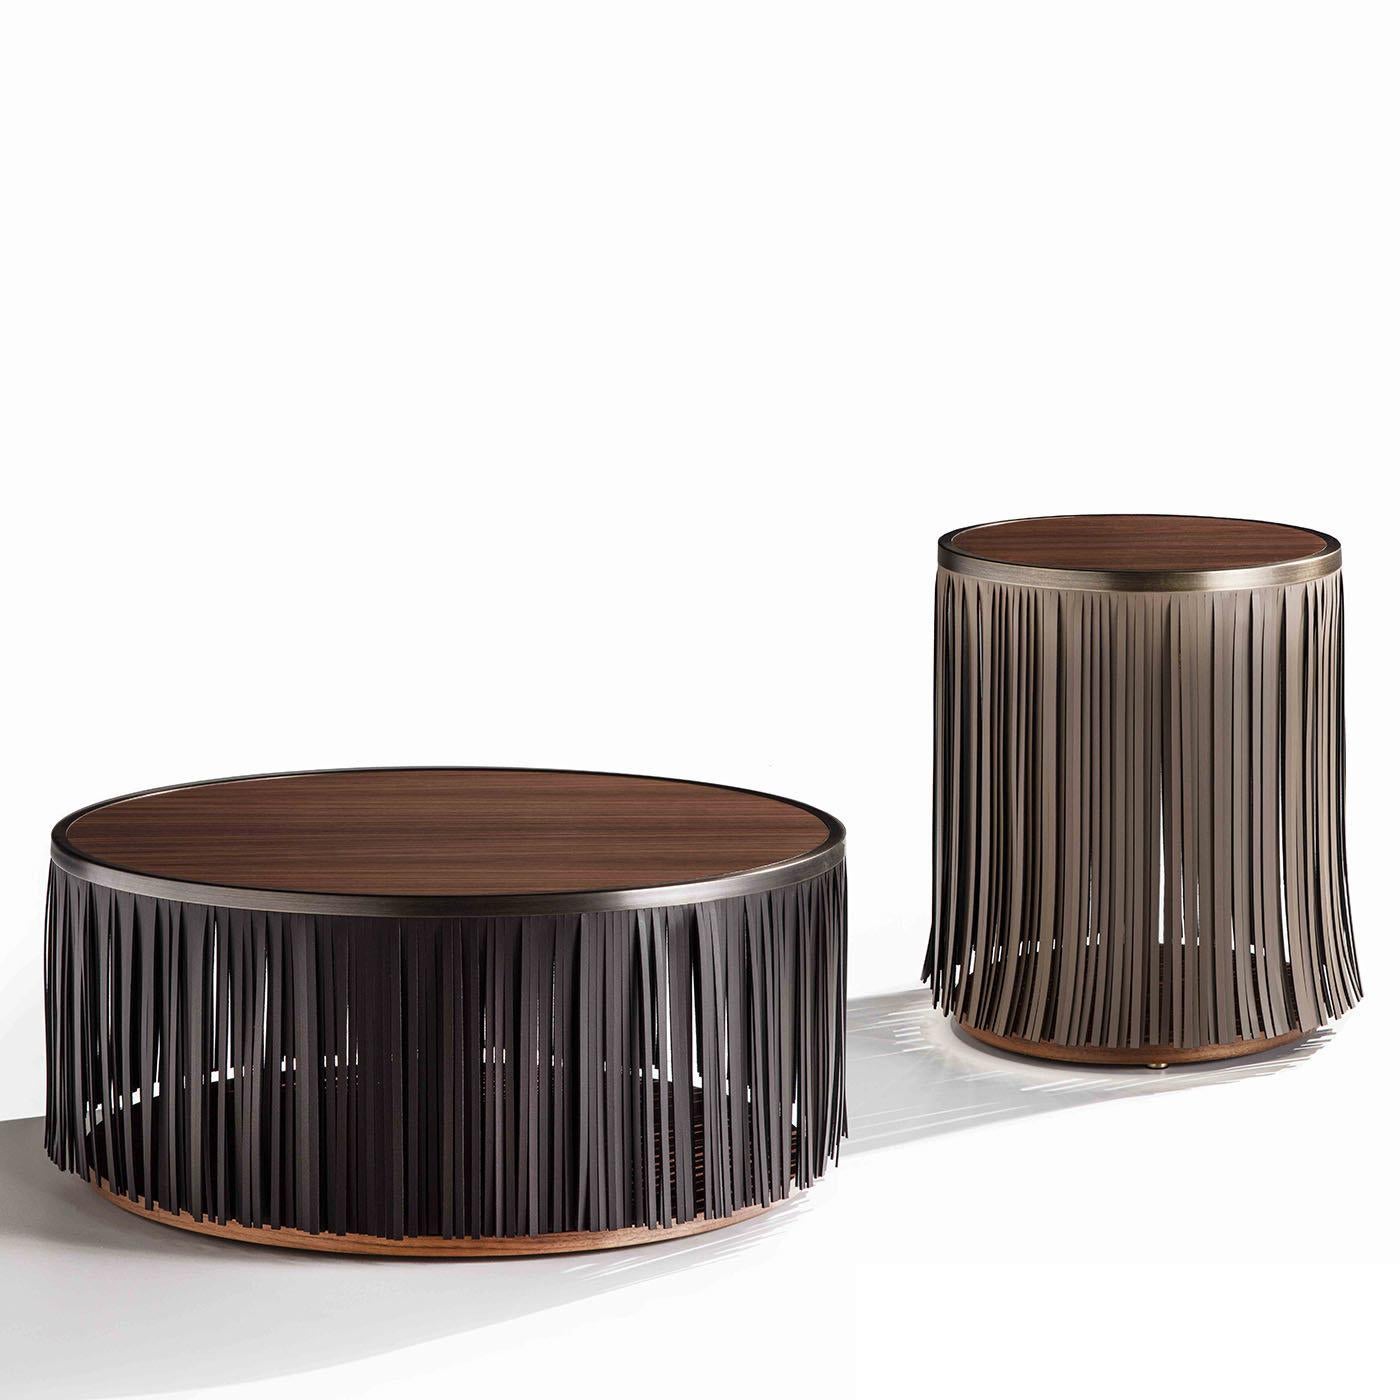 Modern and unique, the Indian Coffee Table is a striking centerpiece that will create a statement in any home. Boasting a simple round shape with a Canaletto walnut wood top and base, this table showcases an eye-catching fringe of black leather